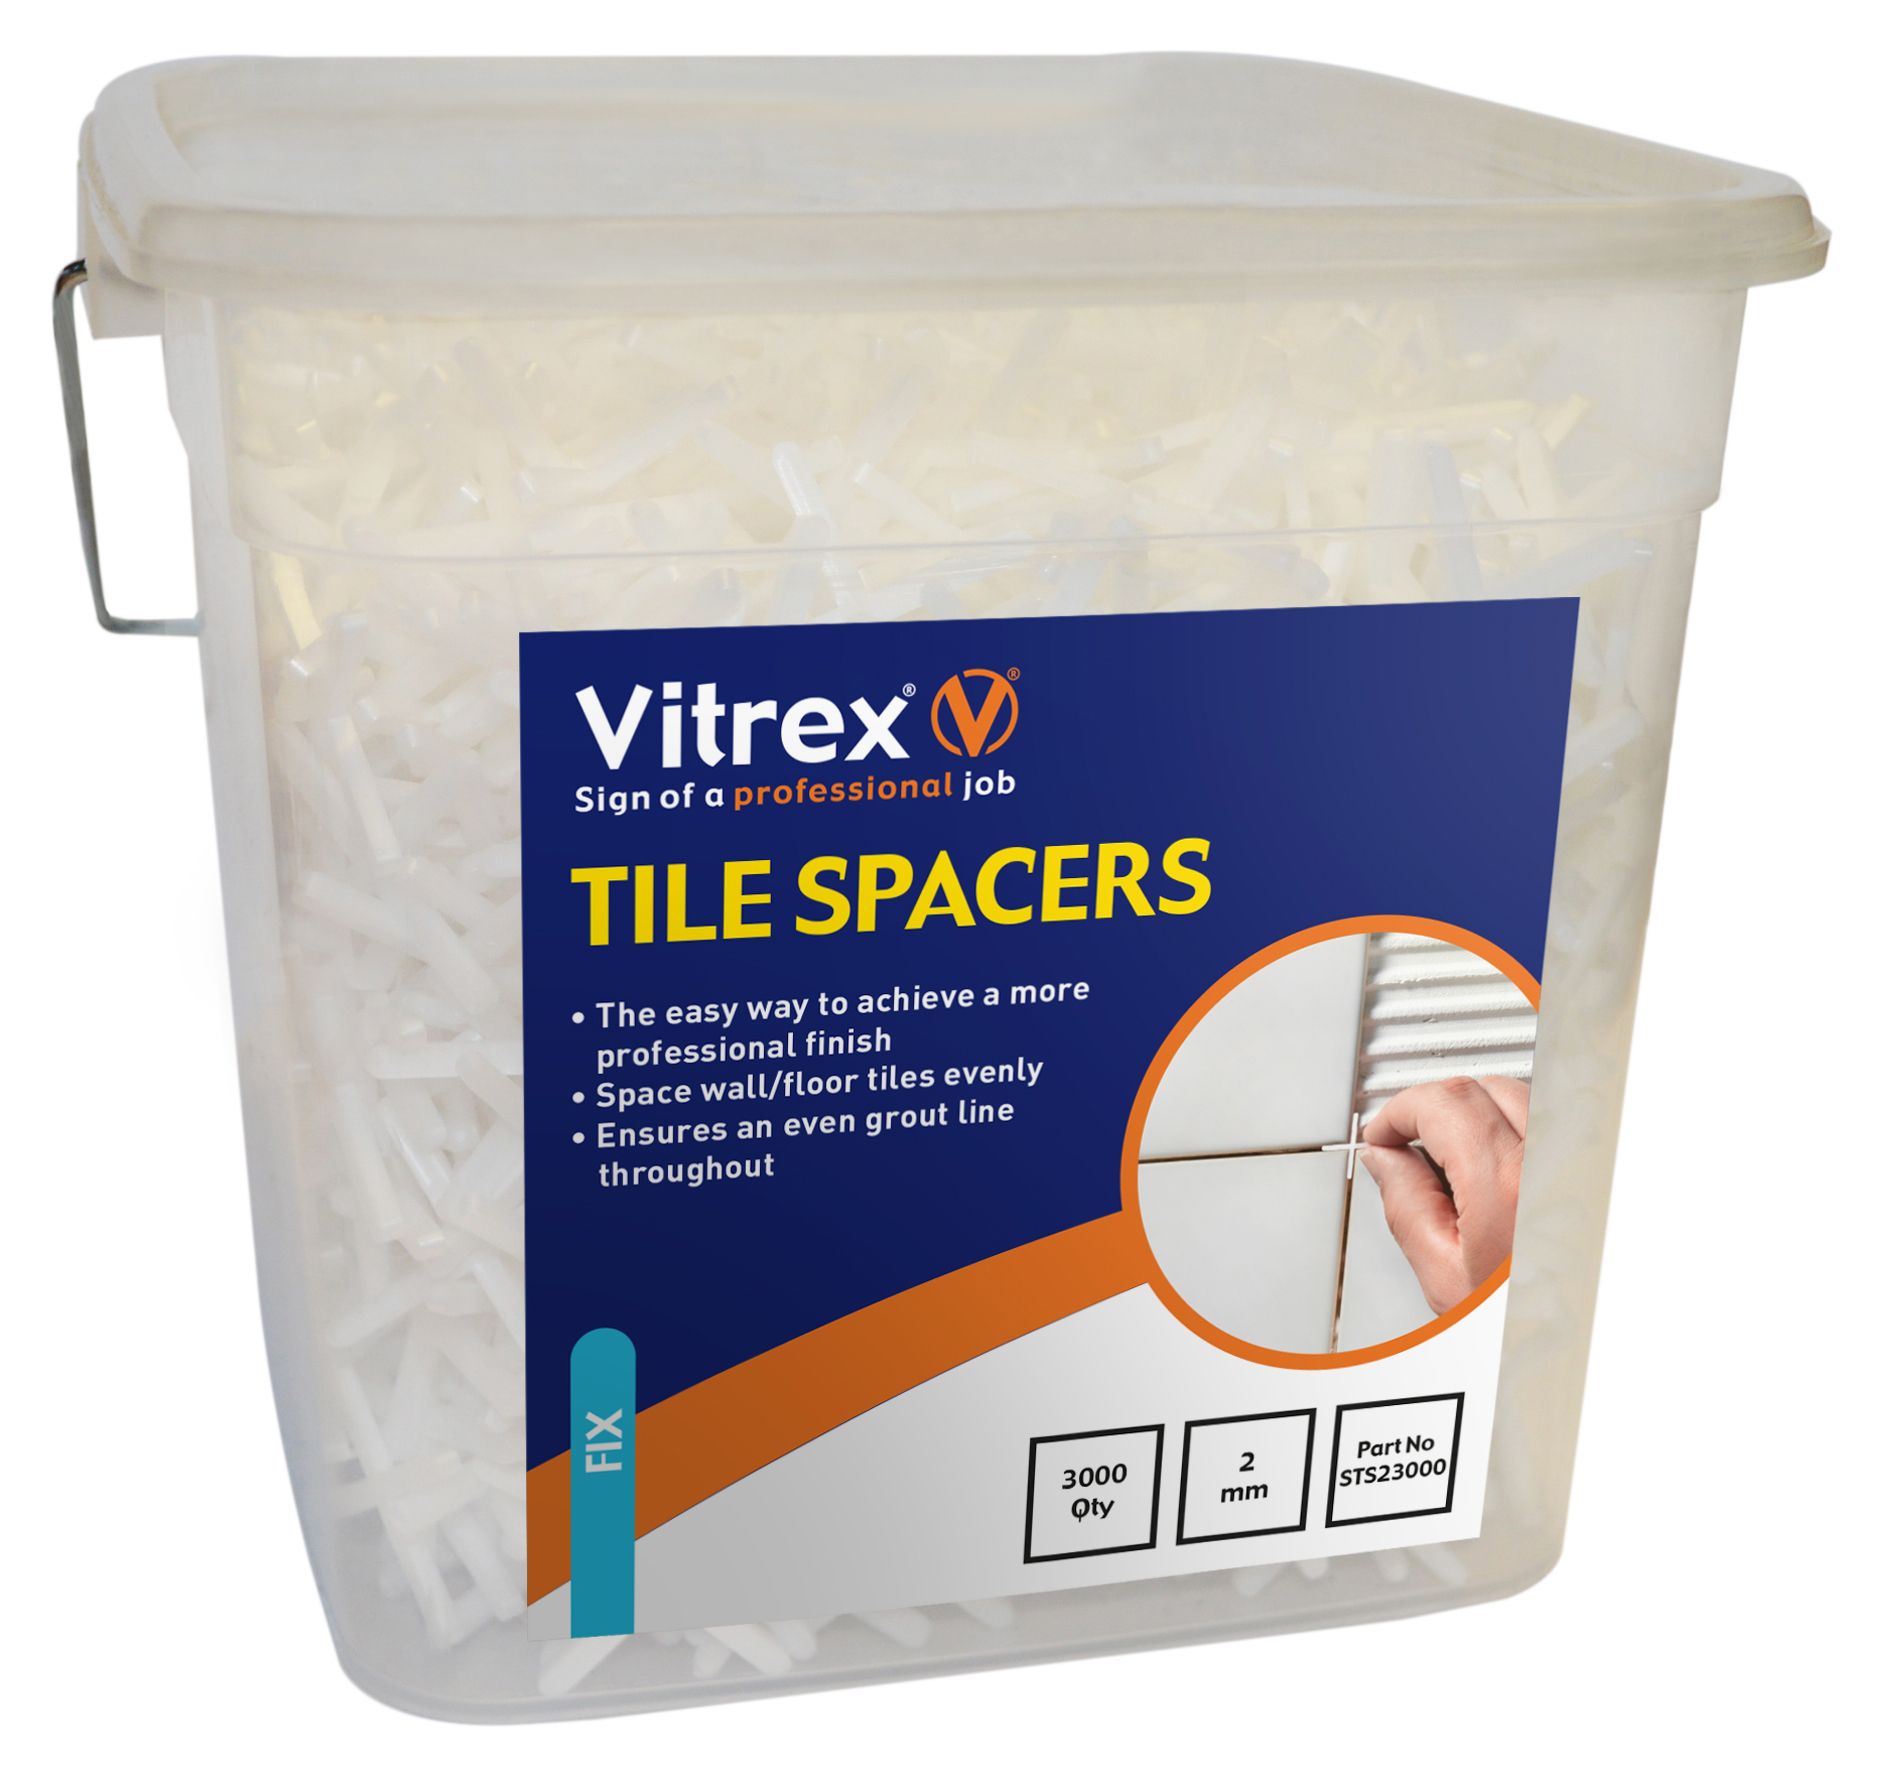 Image of Vitrex Tile Spacers 2mm 3000 Pack